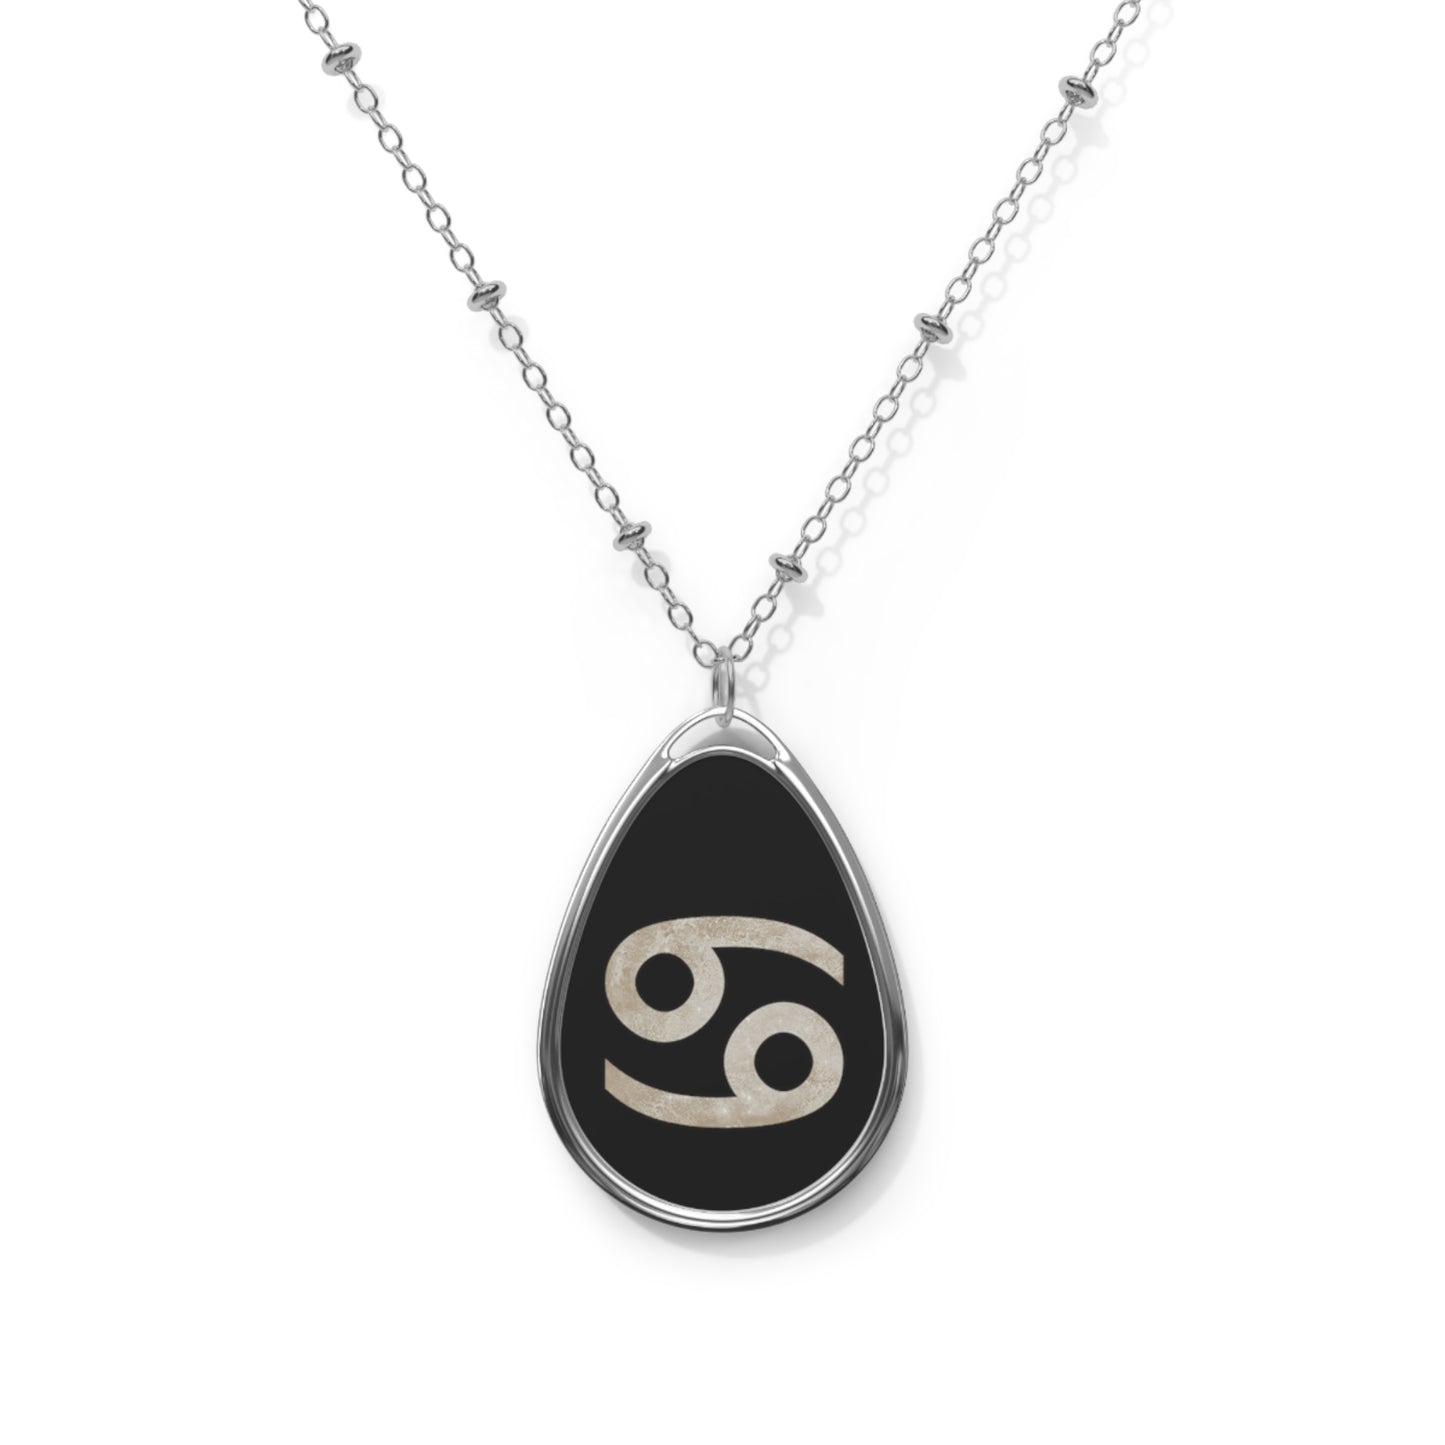 Cancer Zodiac Sign ~ White on Black ~ Necklace & Oval Pendant With Chain